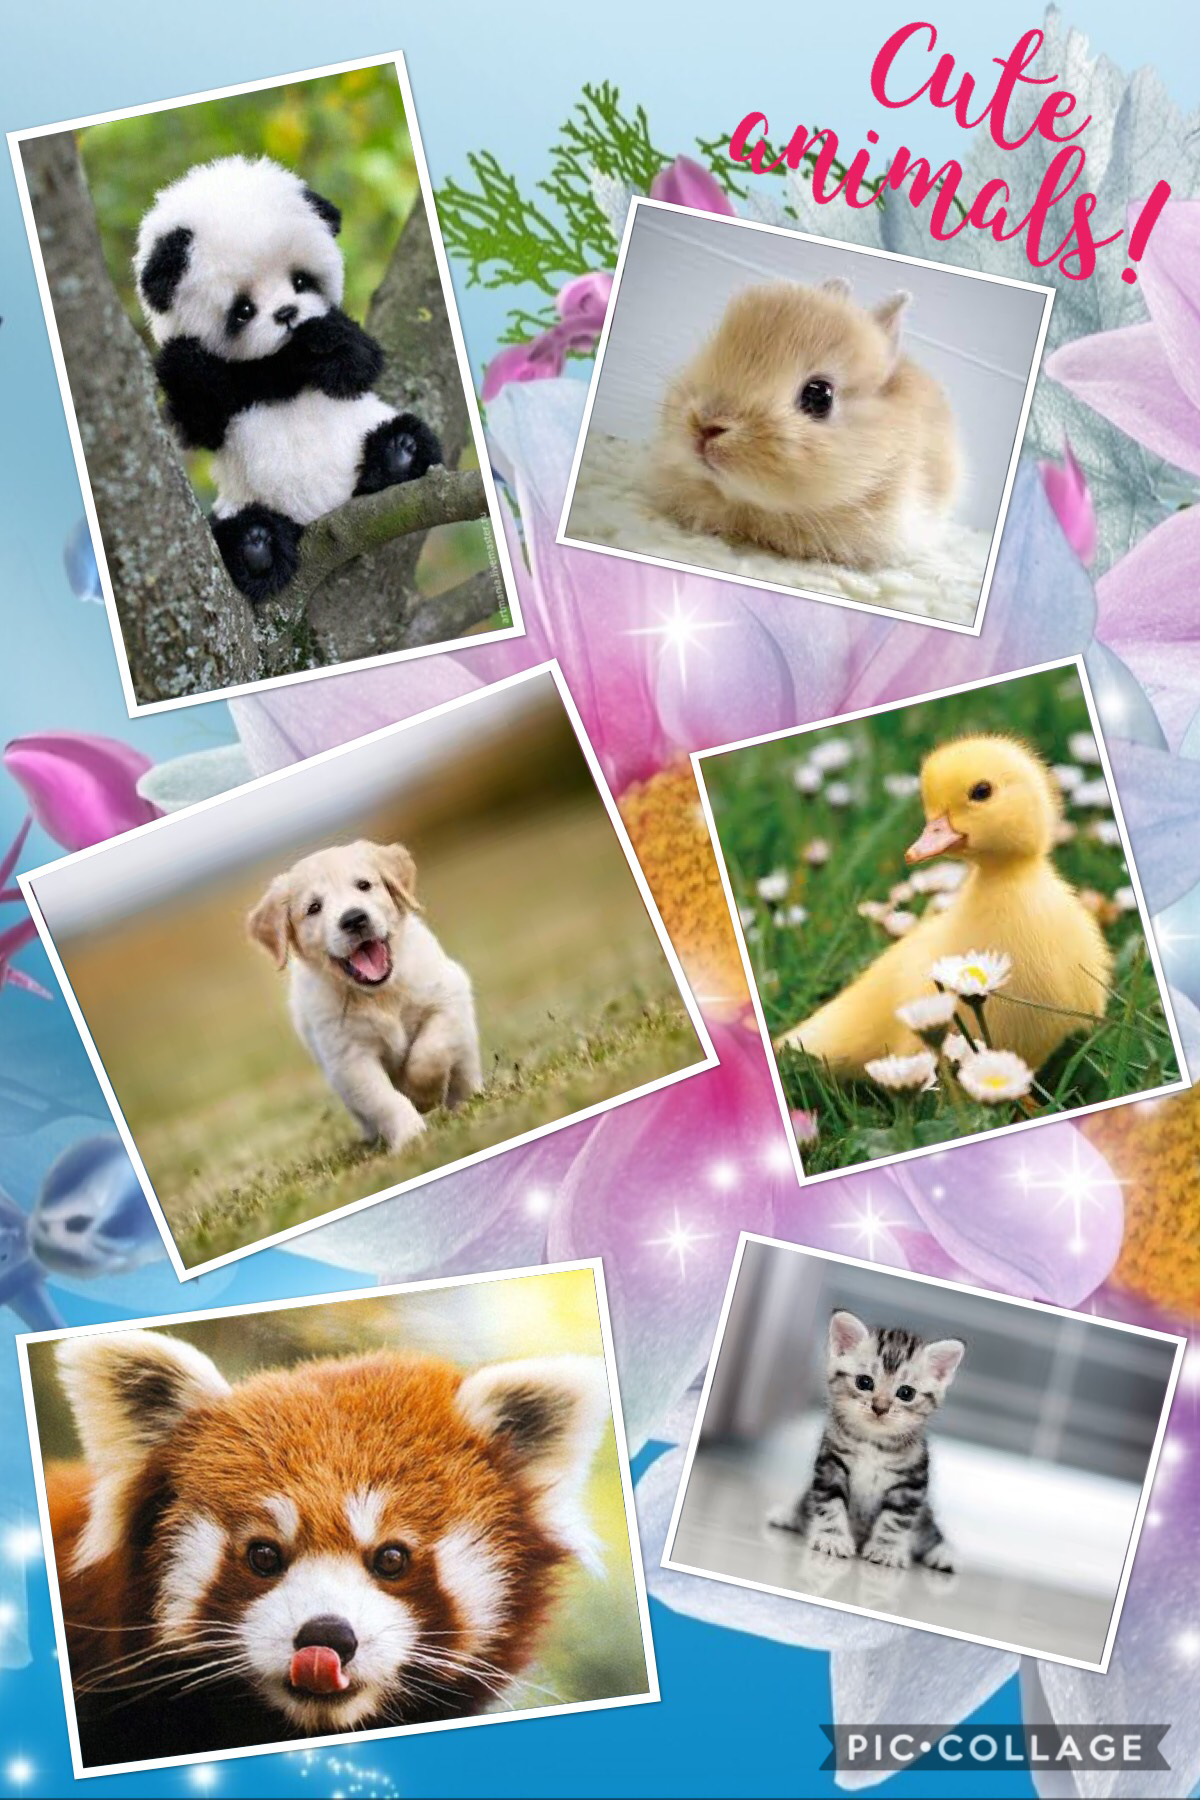 Look at all these cute baby animals!